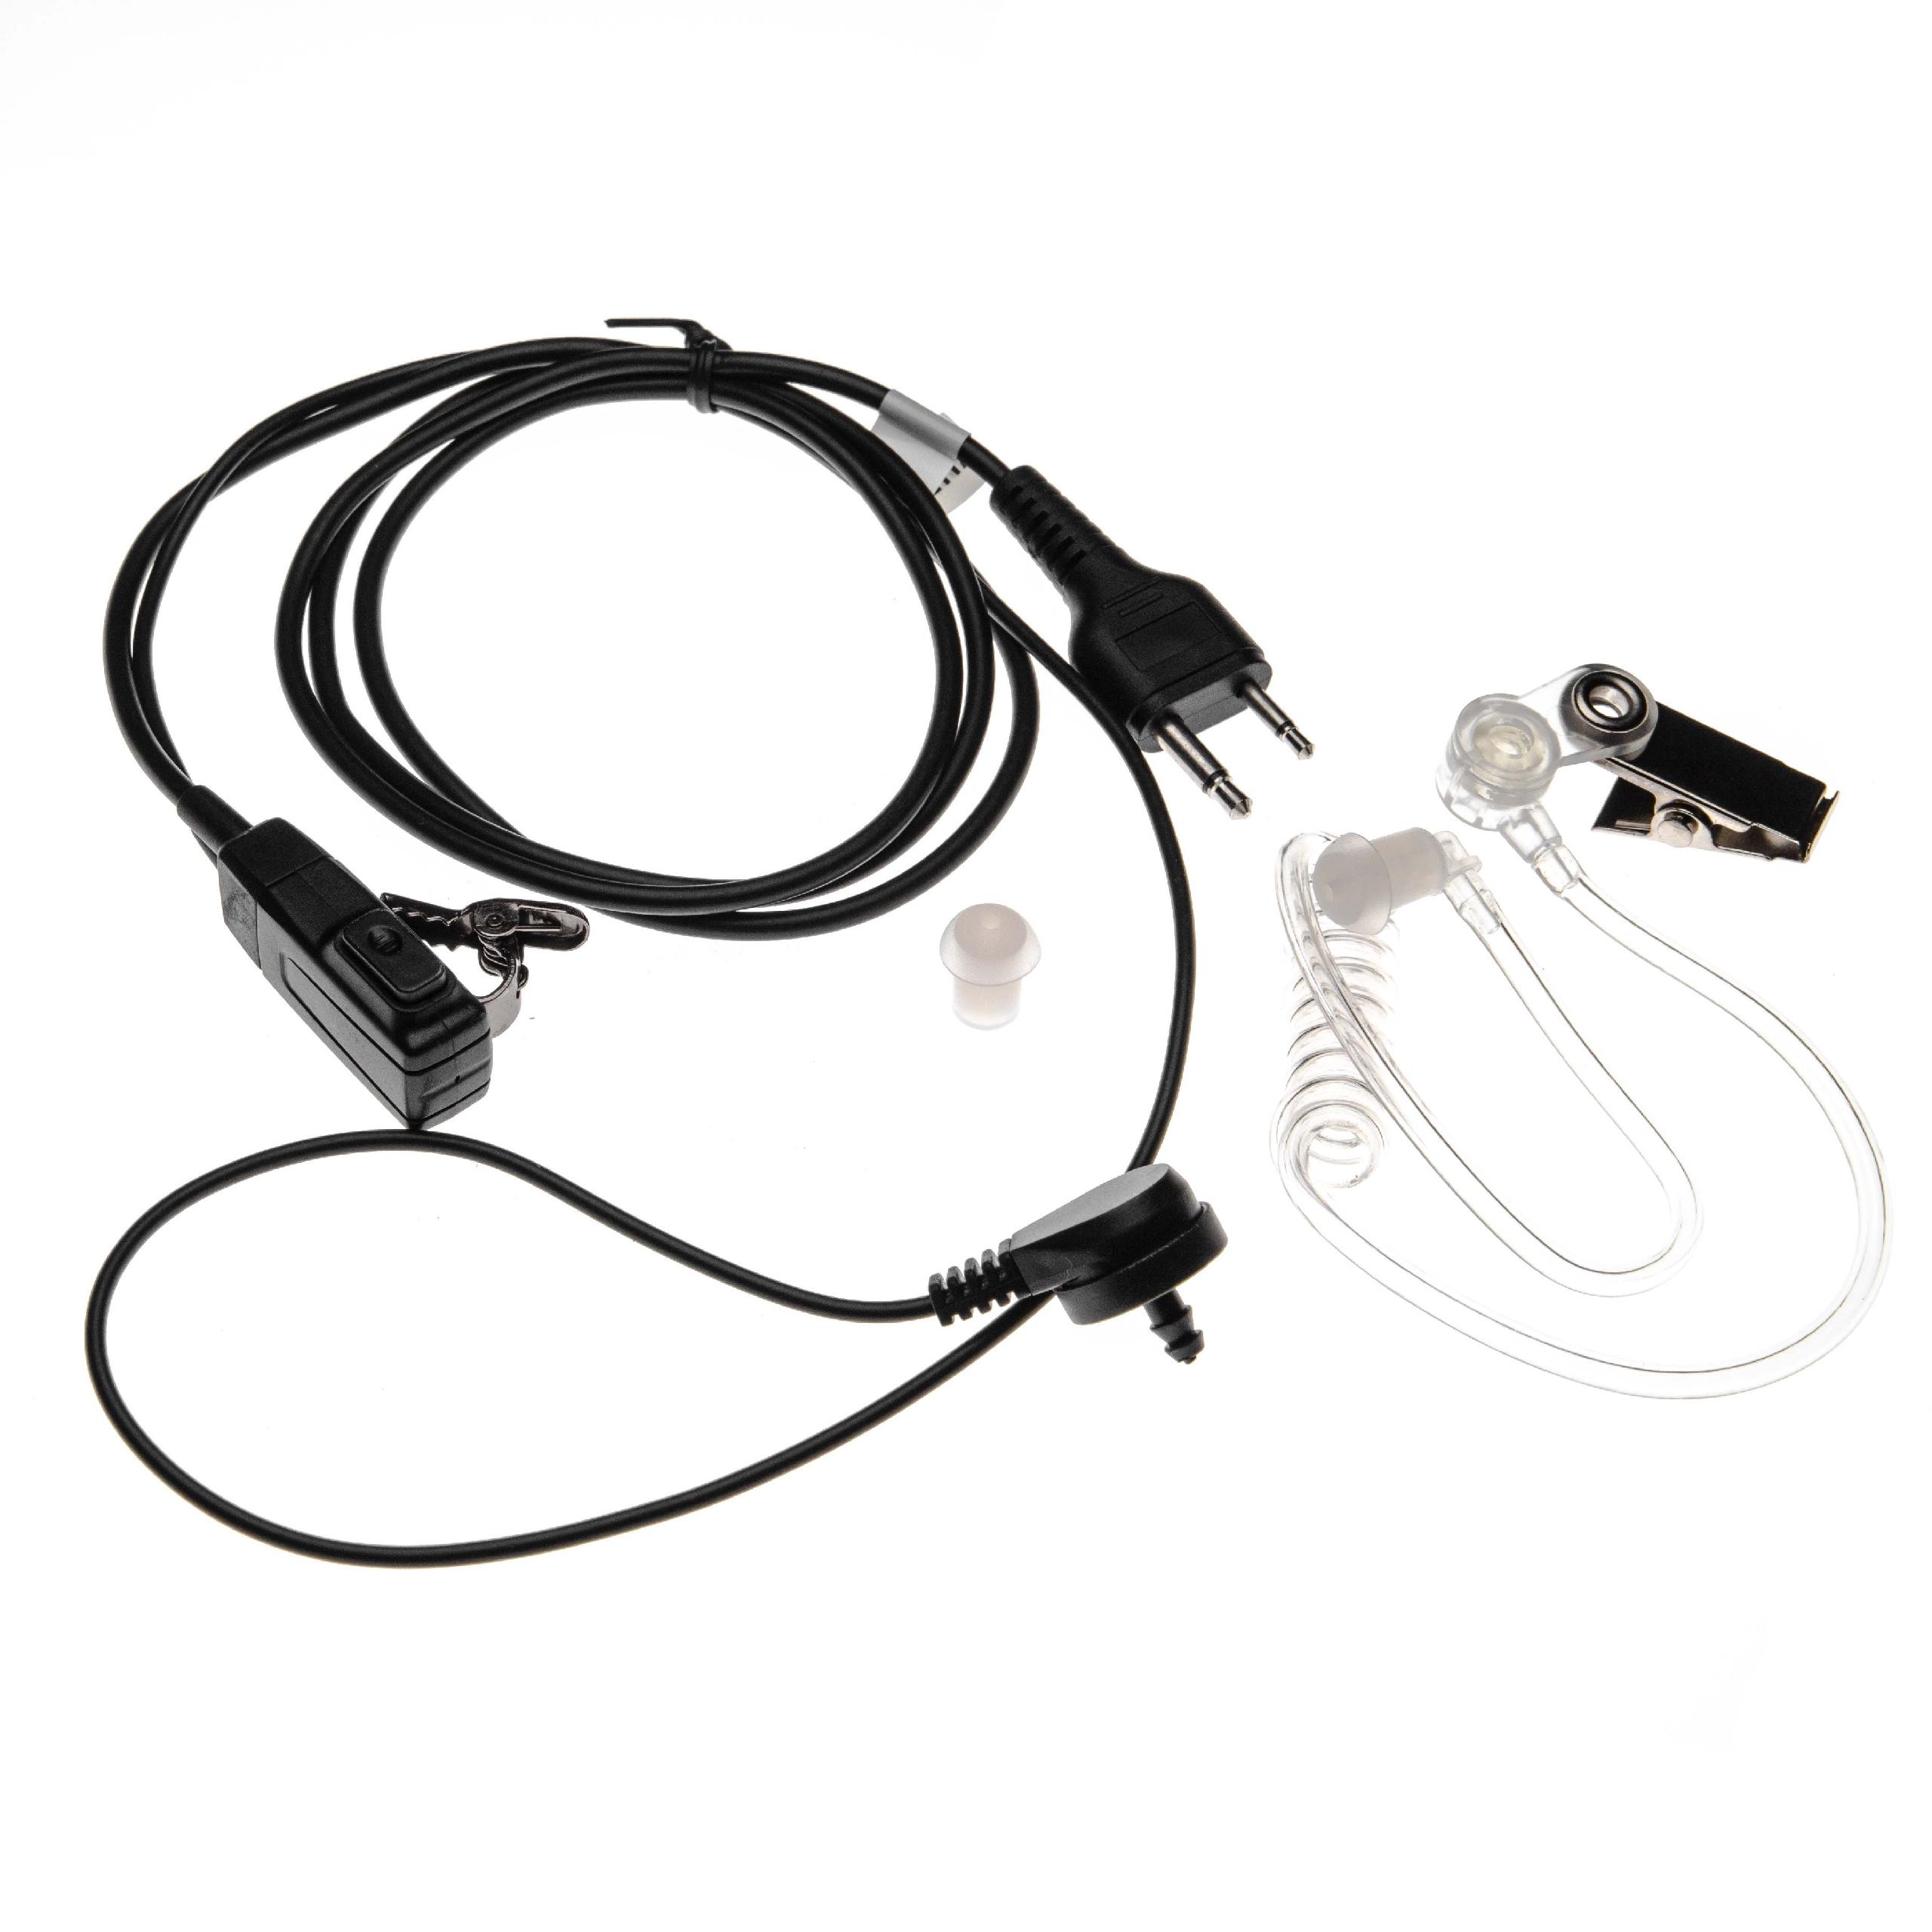 Security Radio Headset suitable for Icom IC-24AT - with PTT Microphone + Clip Mount + phonowire